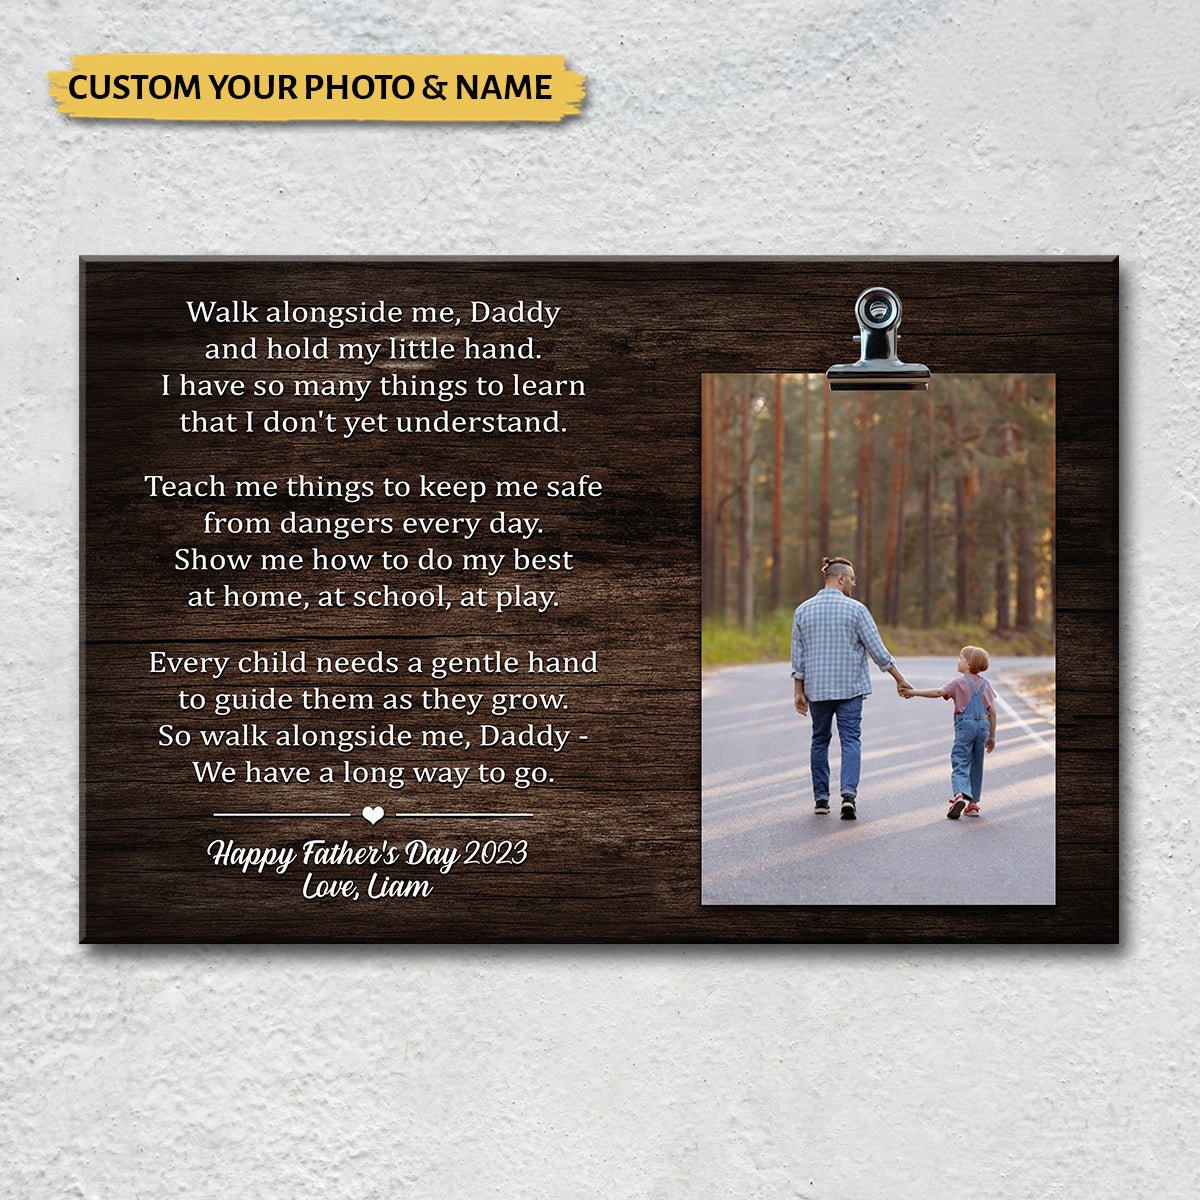 Walk Alongside Me Daddy - Personalized Picture Frame - Best Gift For Dad